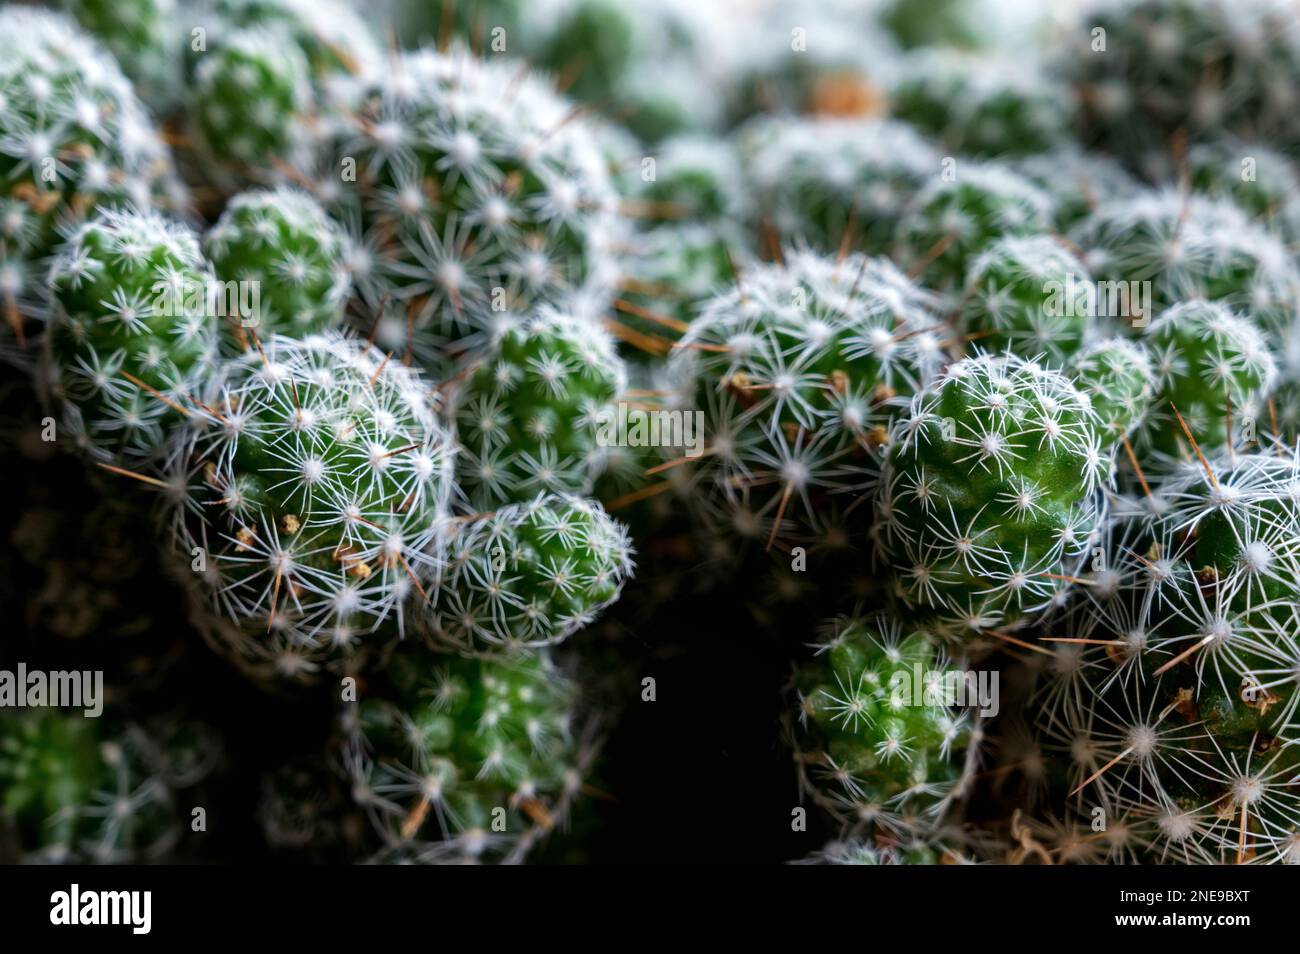 View of Mammillaria or pincushion cactus. Deset plant, close-up photo. Close up Mammillaria gracilis with flower, desert plant with flower. Stock Photo